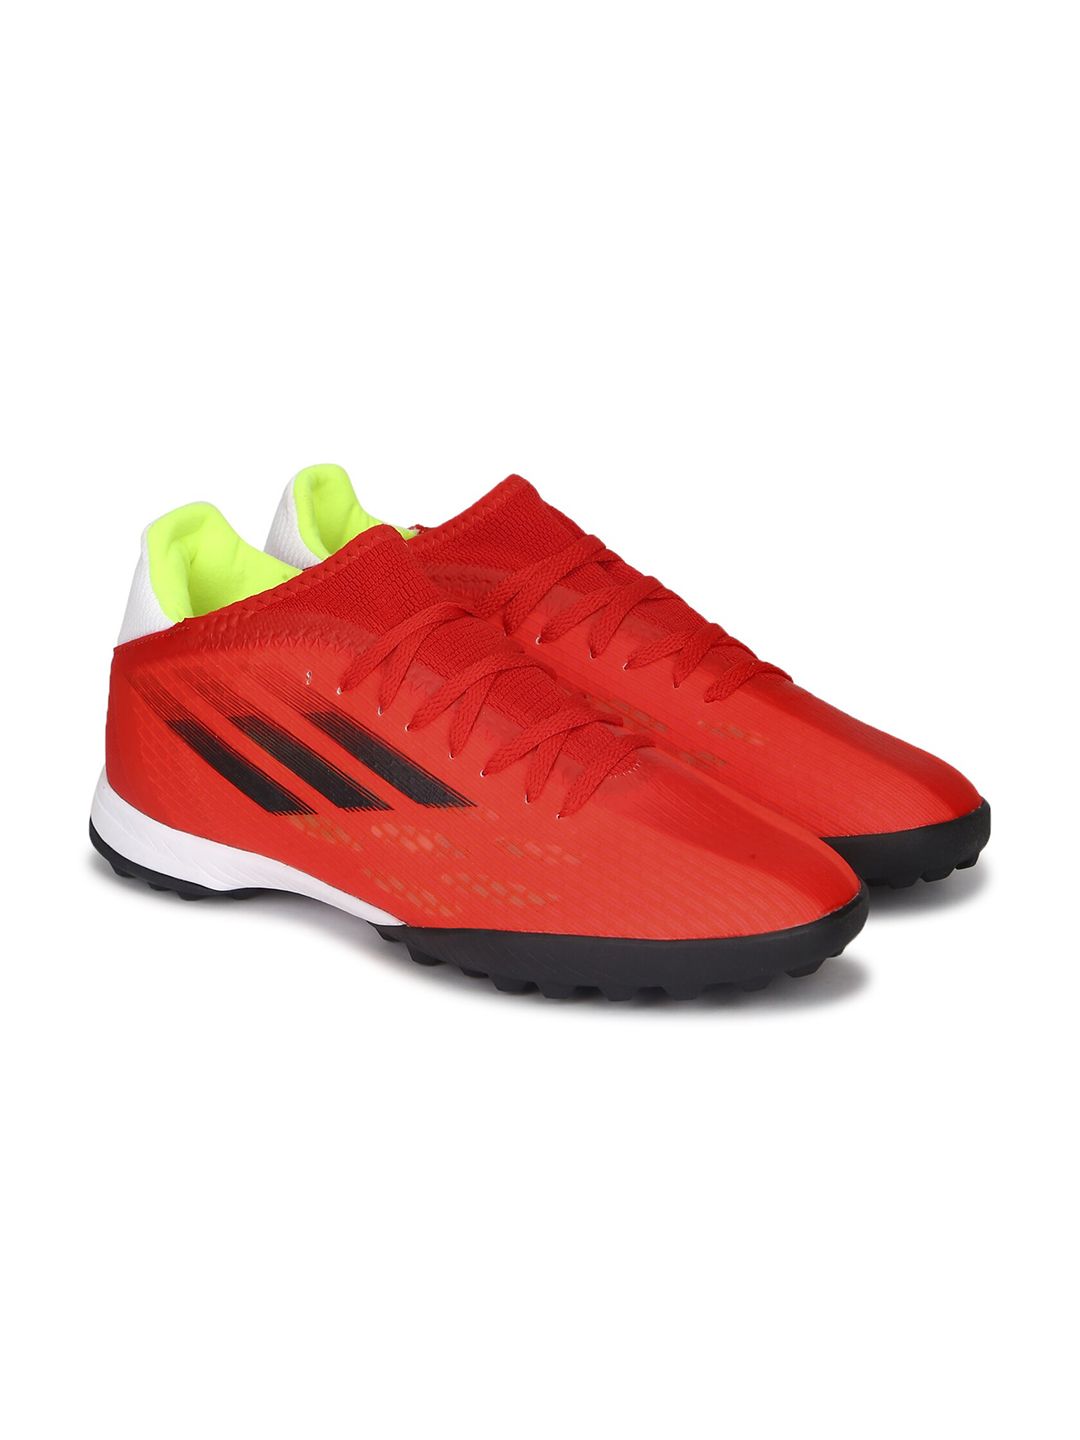 ADIDAS Unisex Red Football Shoes Price in India